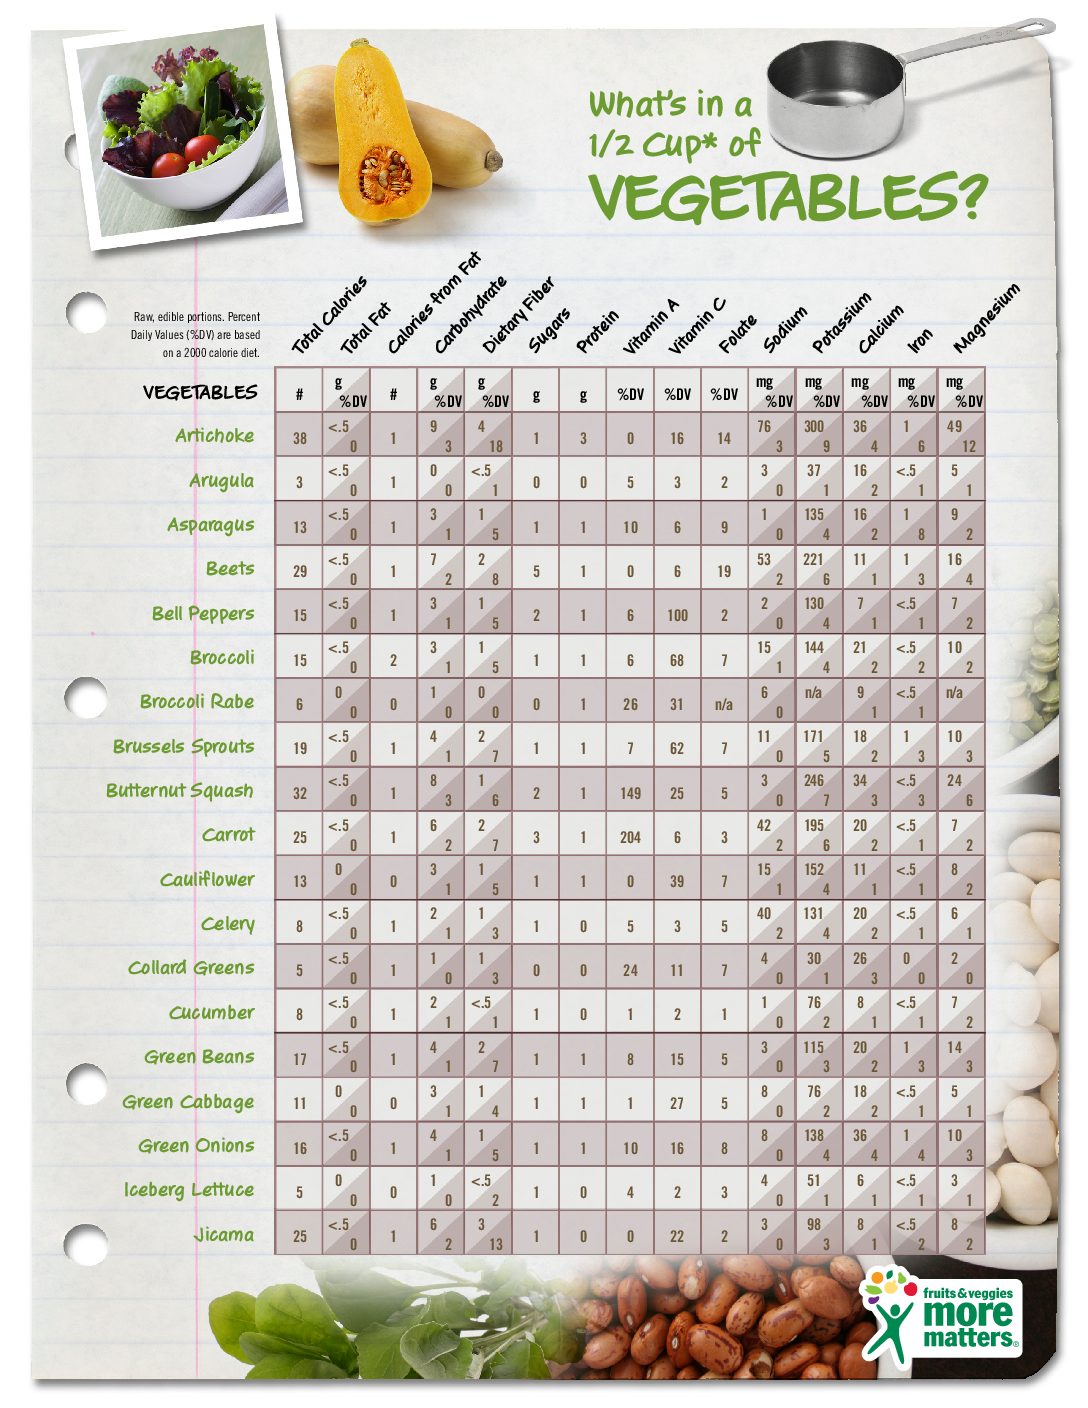 Fruit And Vegetables Carbohydrates Charts